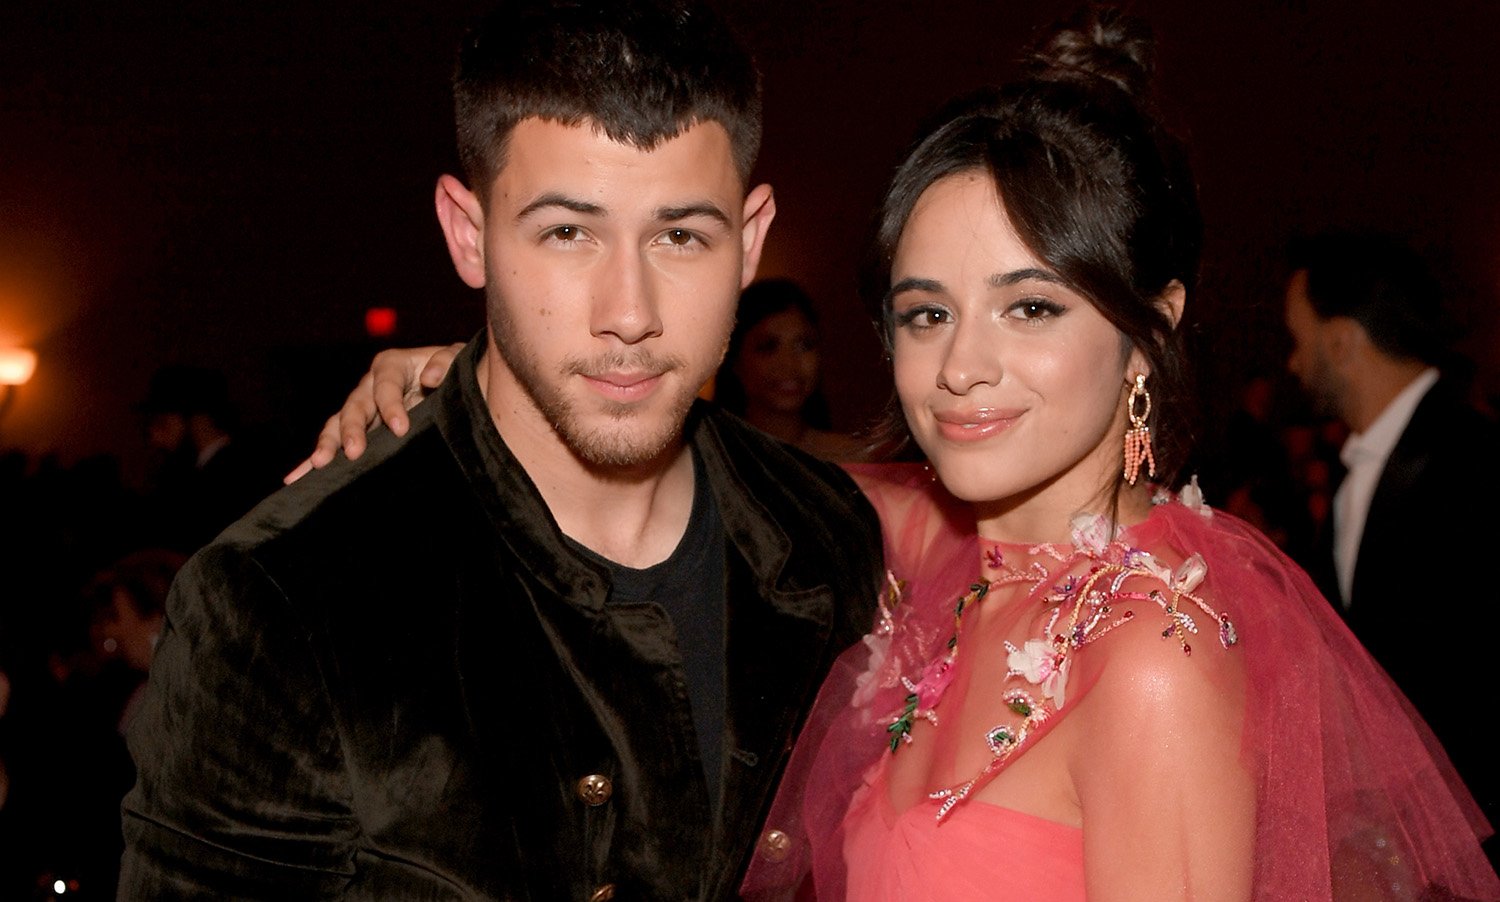 The Voice coaches Nick Jonas and Camila Cabello at the 2017 Person of the Year Gala